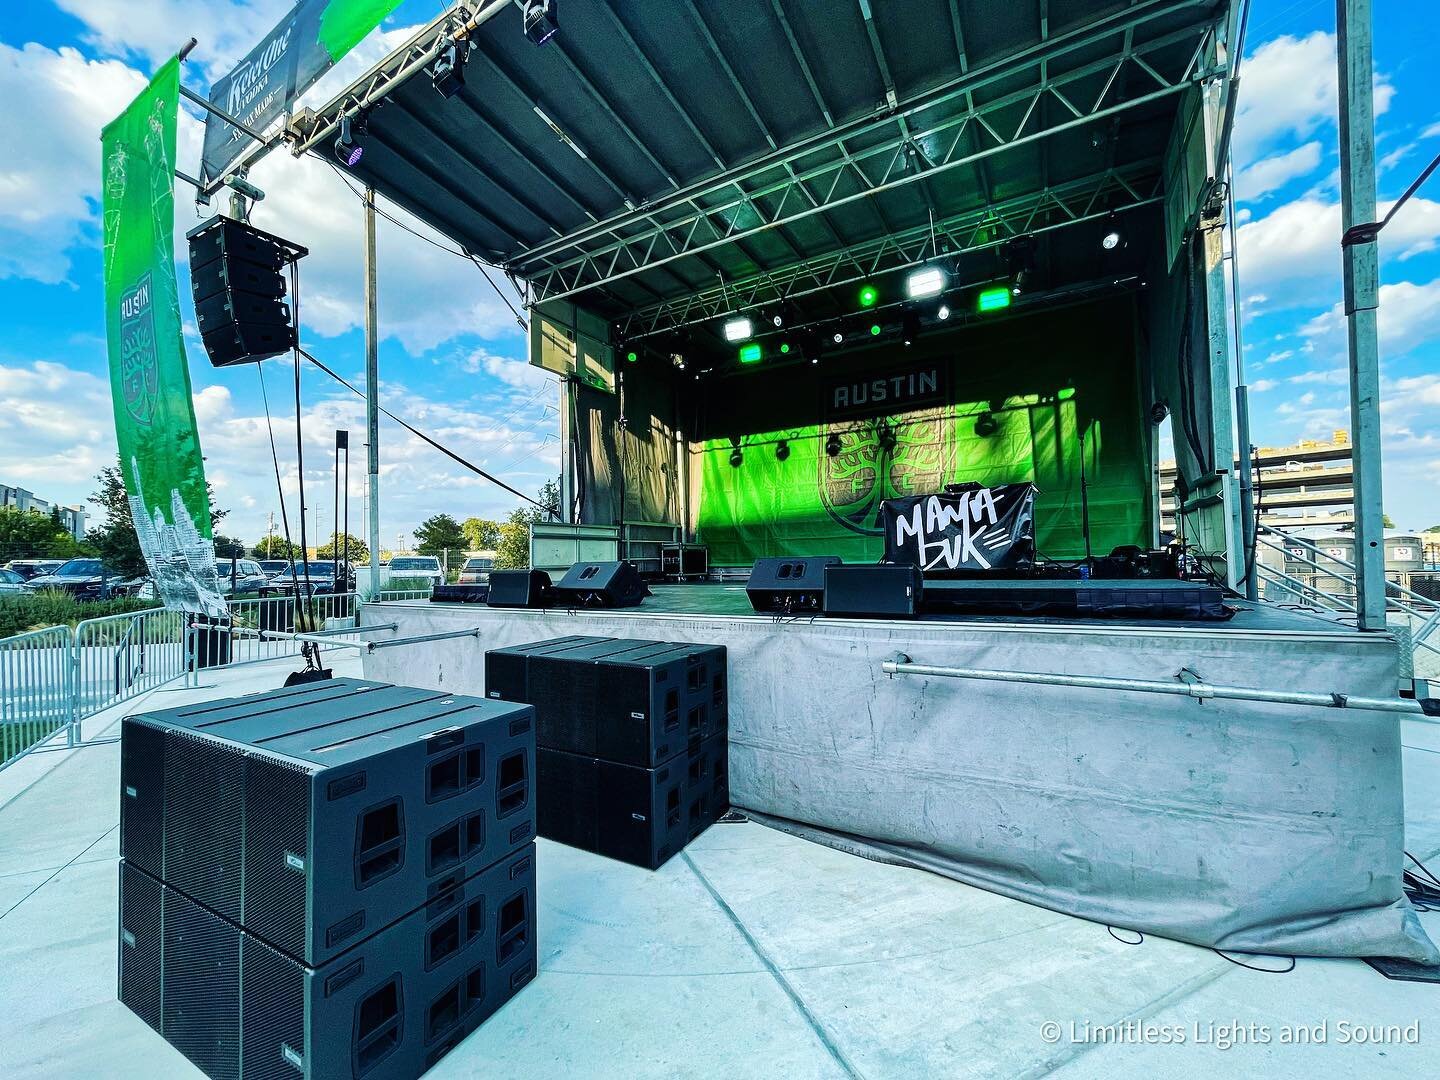 Good times end-firing some subs and blinking some lights for @heardglobal over at Q2 last weekend. This PA config is perfect for this size space. 
. 
AUDIO: 
(4) @dbtechnologies VIO S218 subs 
(8) @dbtechnologies VIO L210 tops 
(1) @allenandheath SQ6